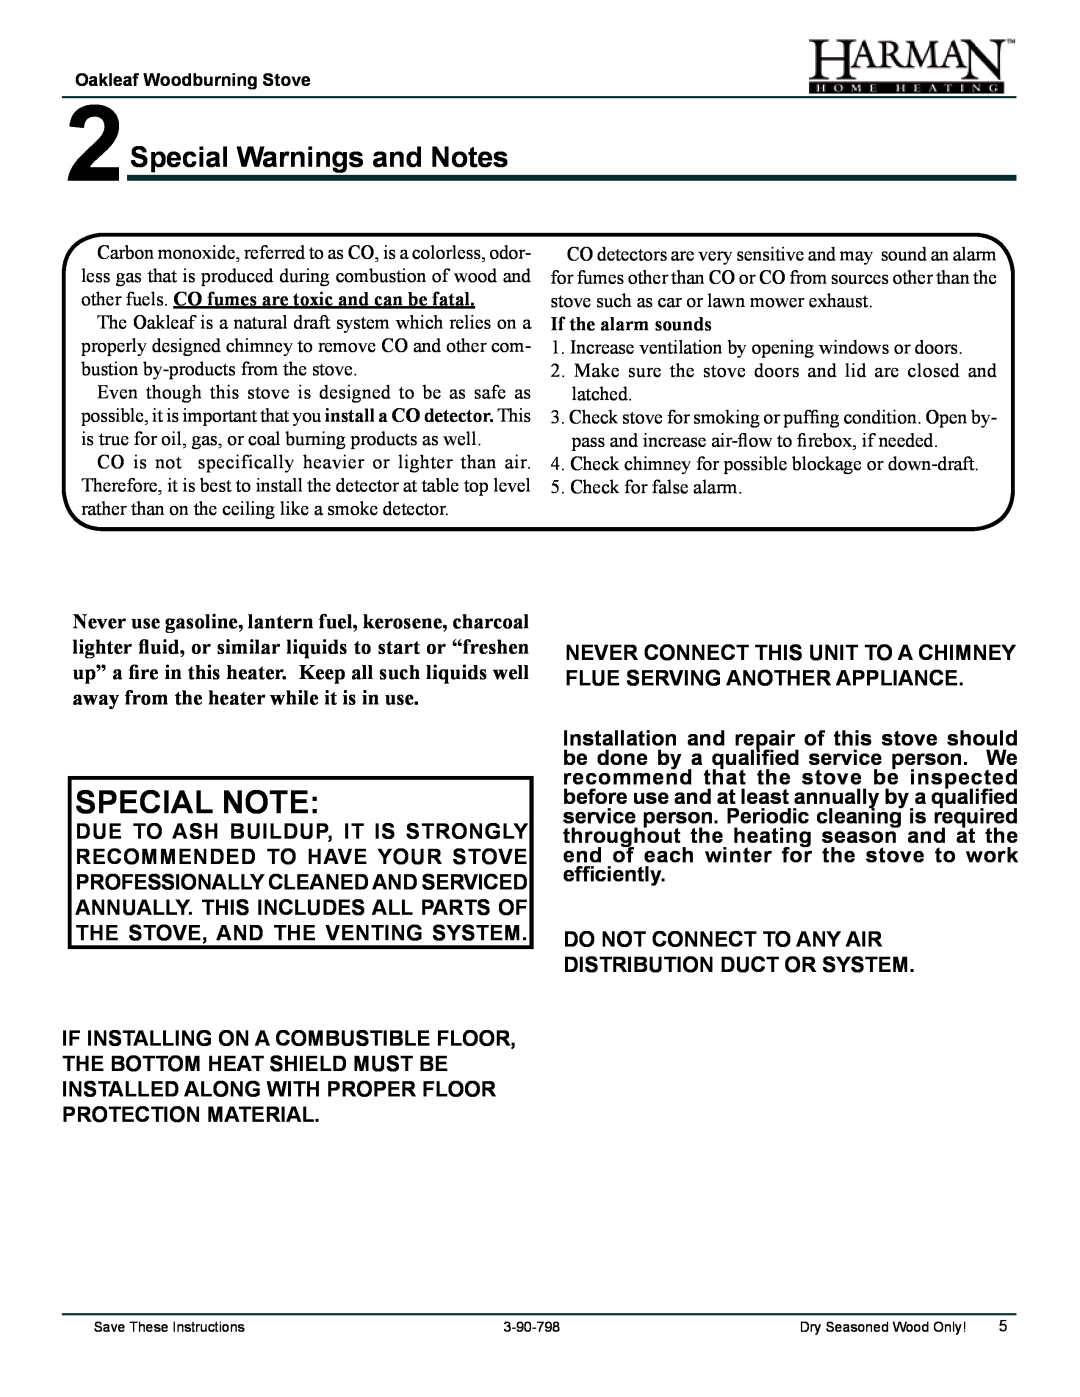 Harman Stove Company 1-90-797000 manual Special Note, 2Special Warnings and Notes 